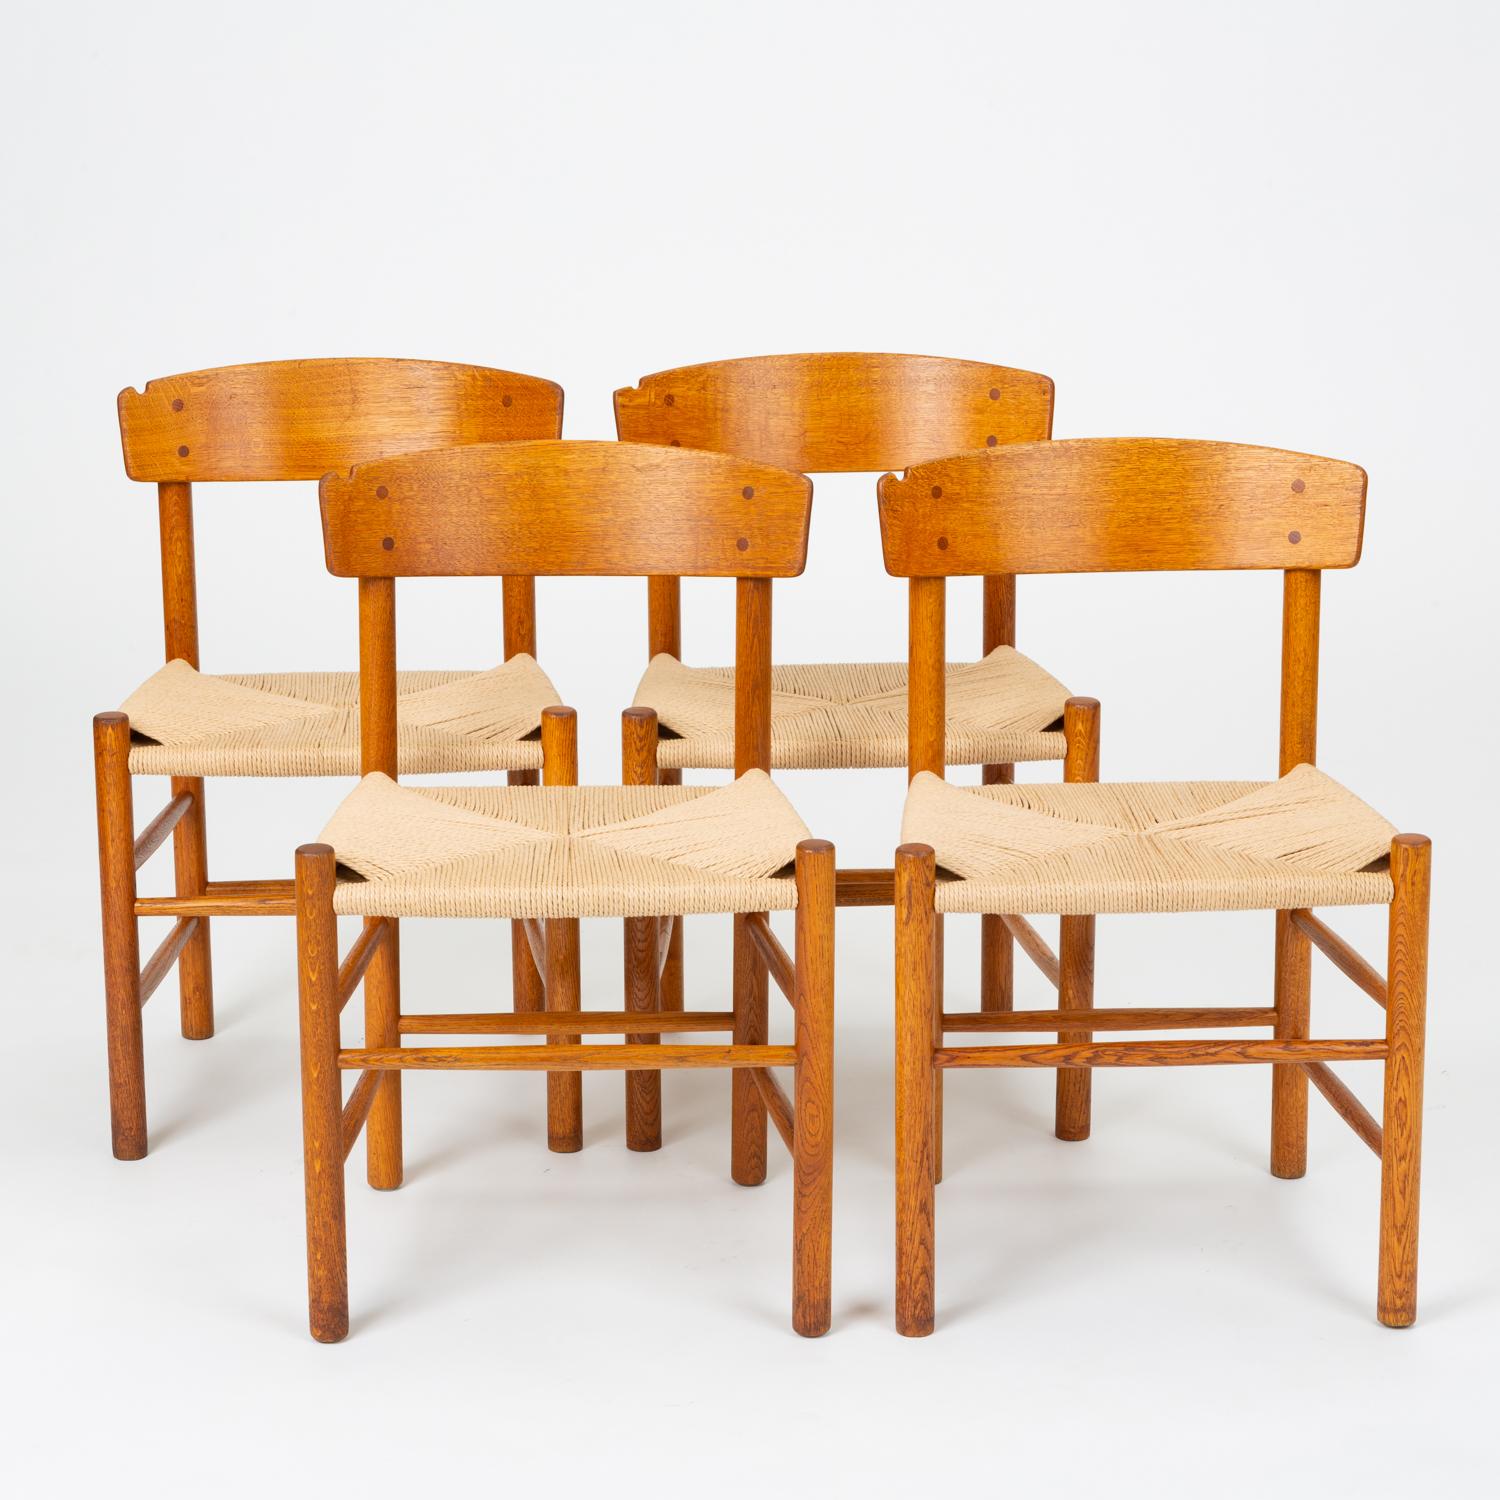 A set of four customized dining chairs by Børge Mogensen for FDB Møbler beginning in 1947. The J39 or “People’s Chair,” has a frame of oak dowels, with a wide, curved backrest and a woven seat in Danish paper cord. Each backrest has a smooth notch